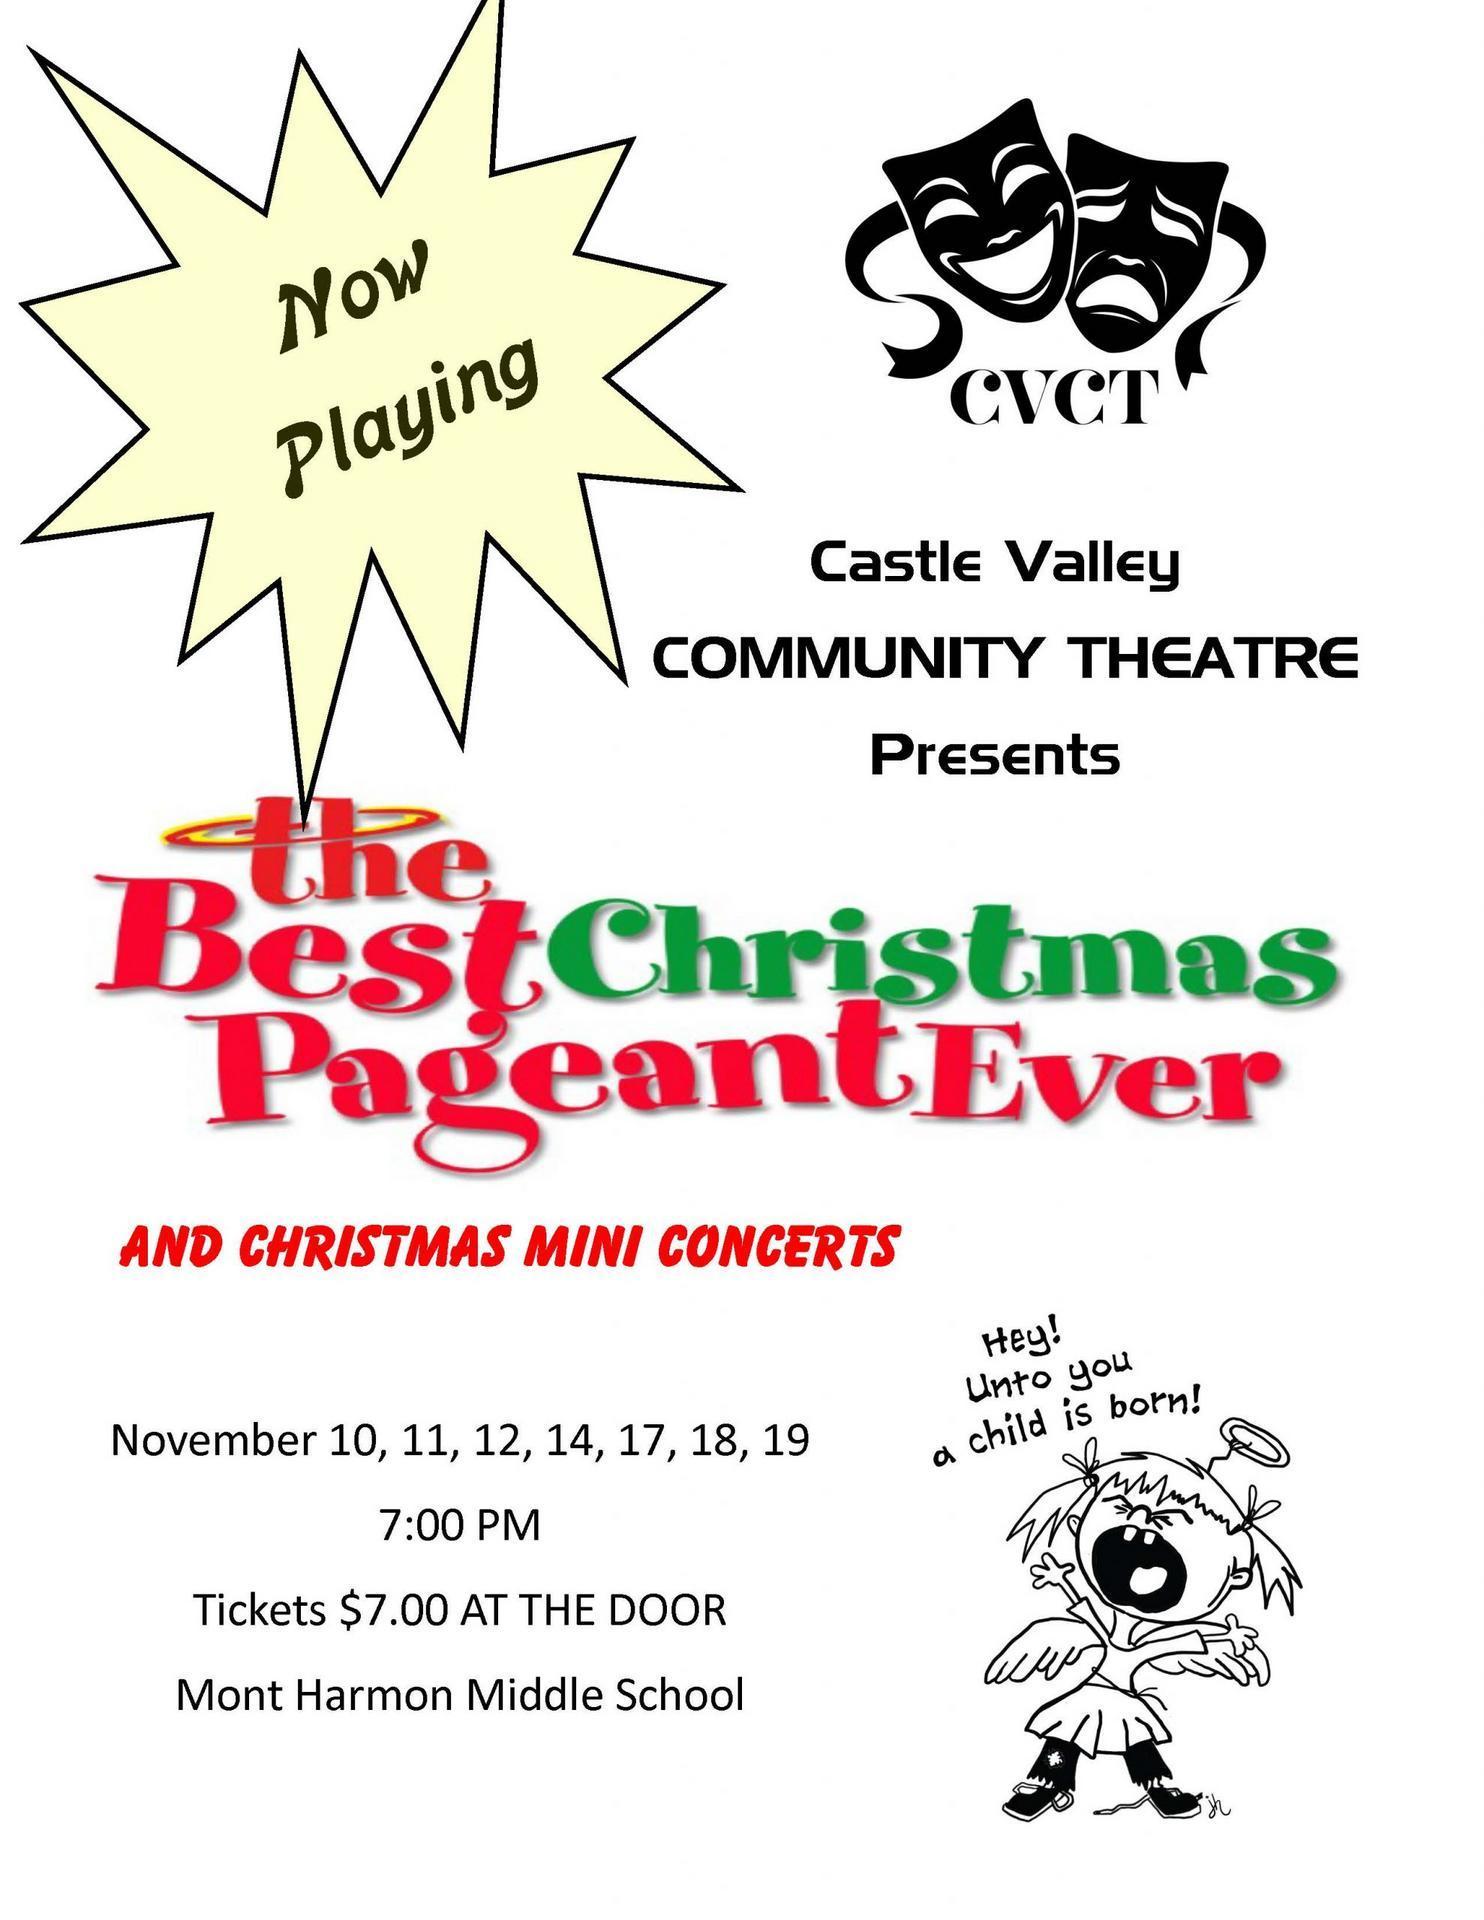 Best-Christmas-Pageant-Ever-Flyer-with-Dates-scaled.jpg